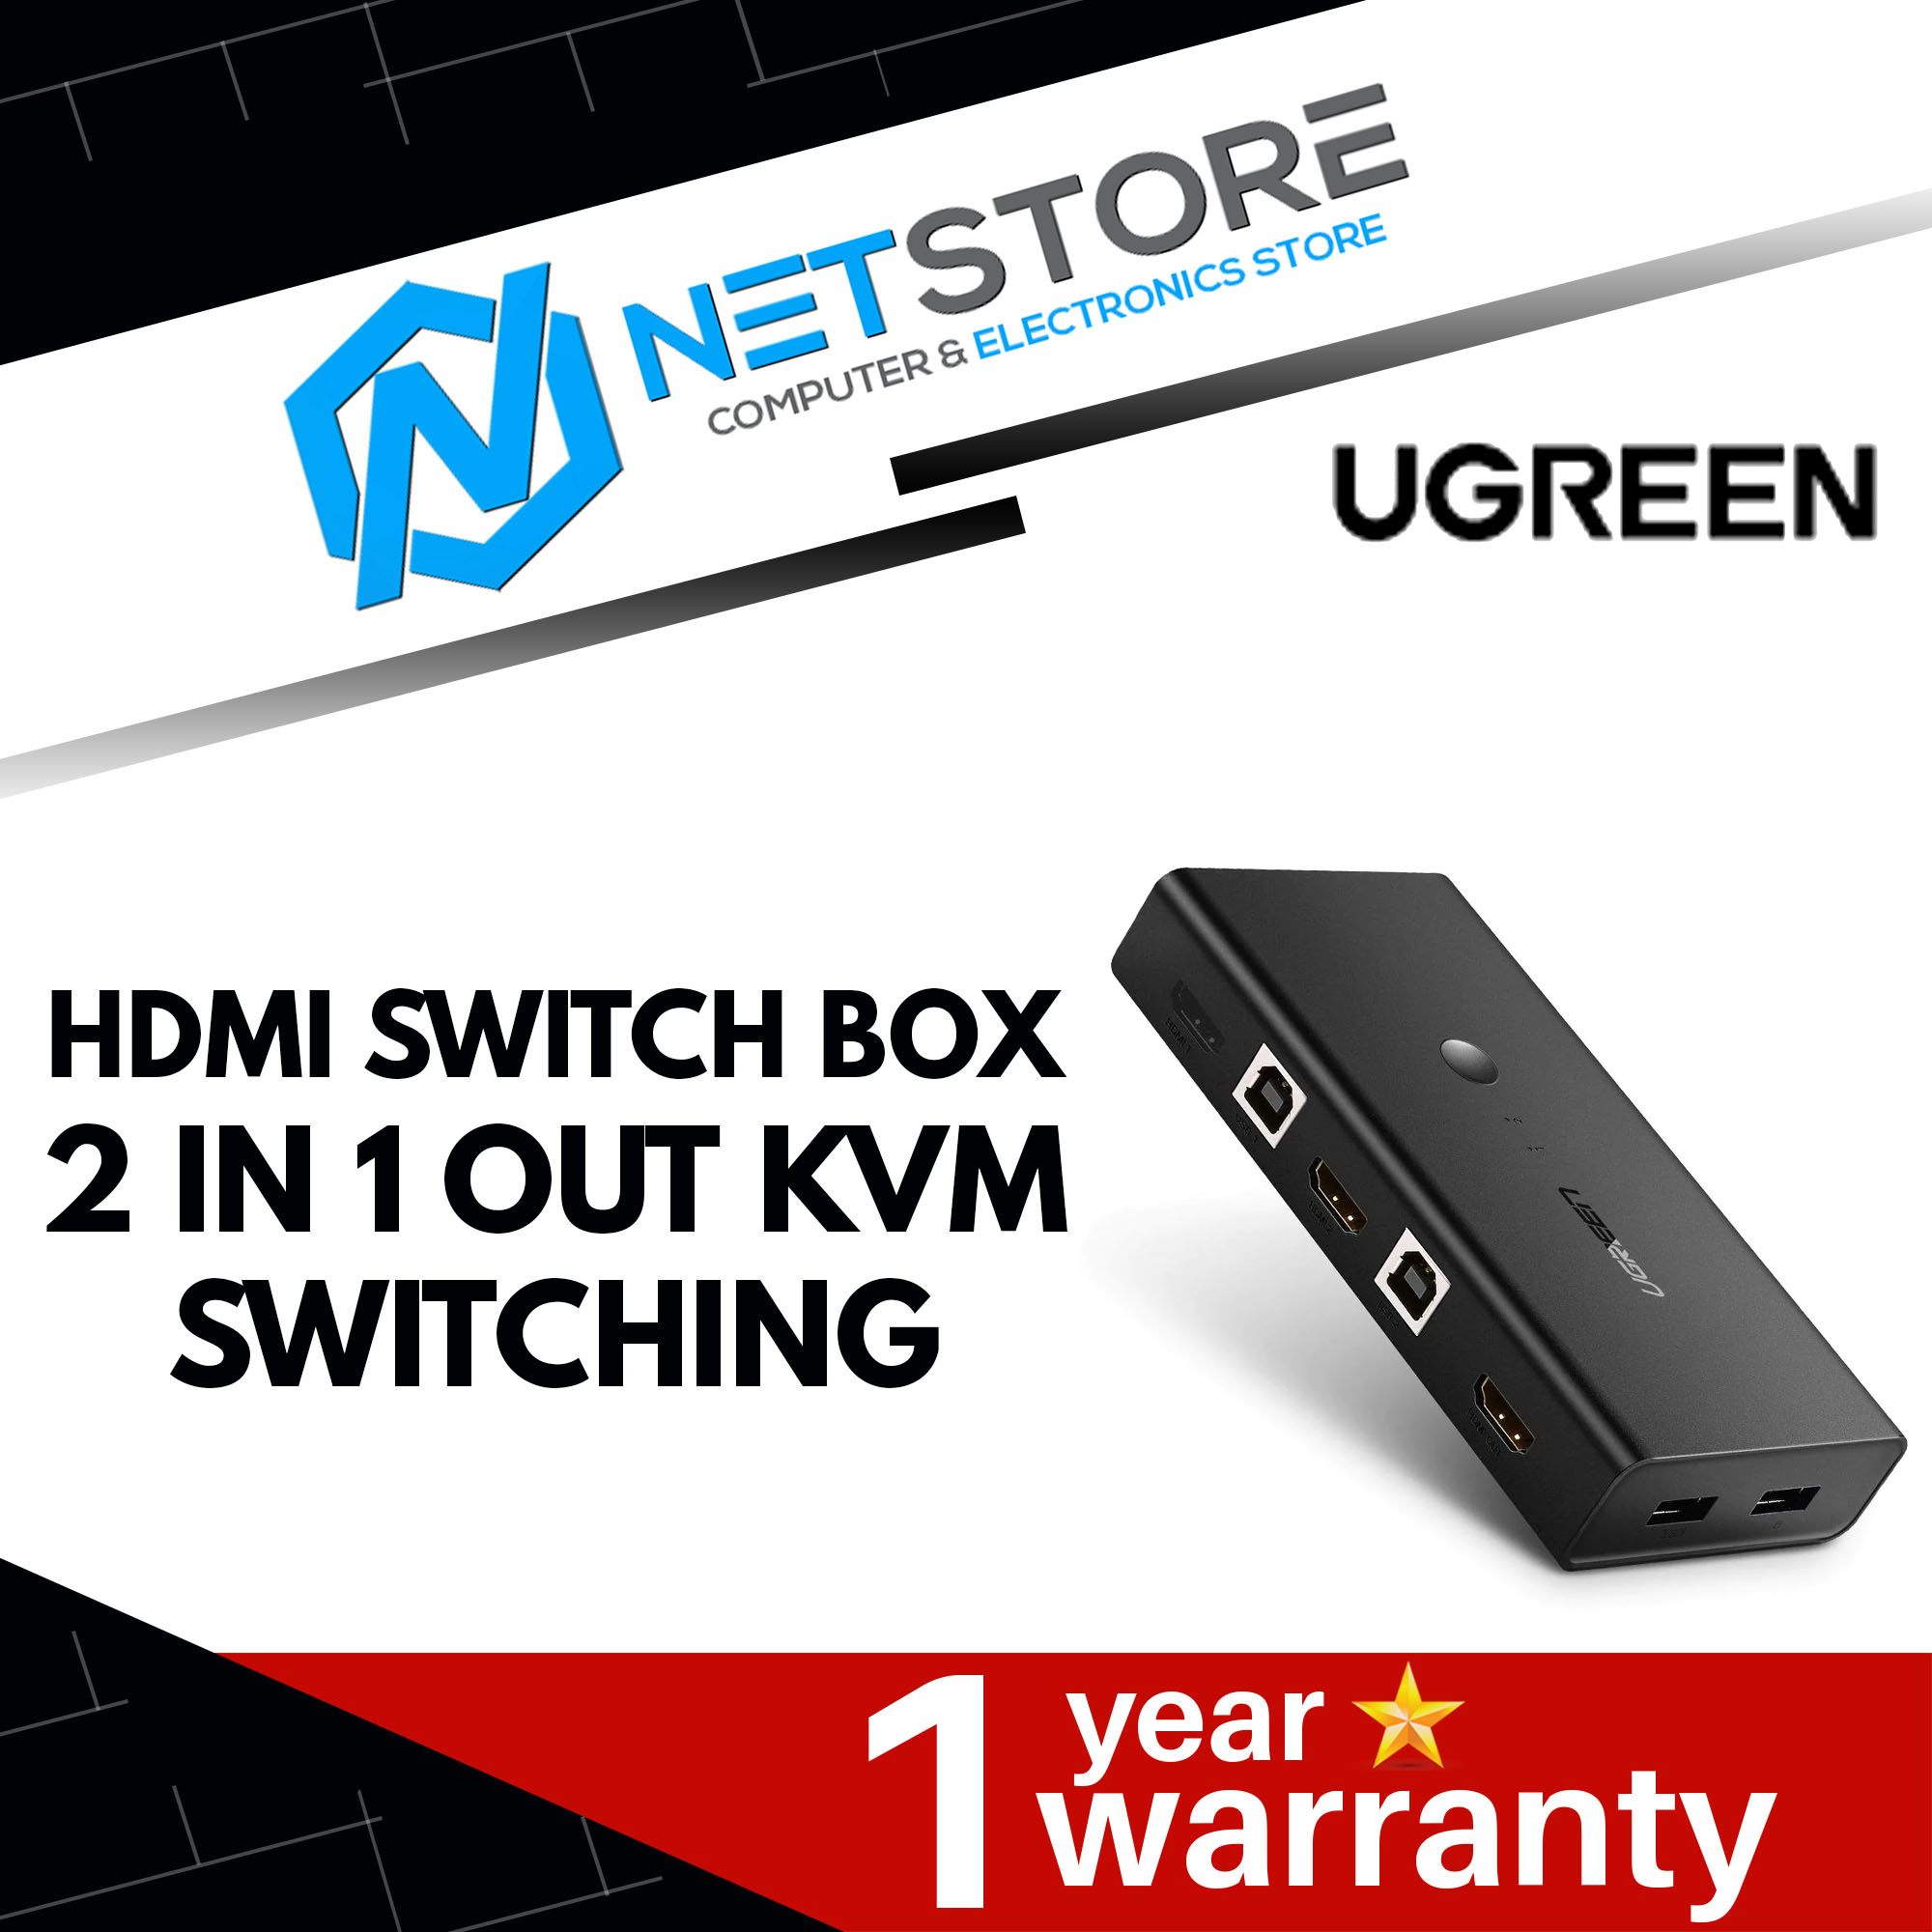 UGREEN HDMI SWITCH BOX 2 IN 1 OUT KVM SWITCHING